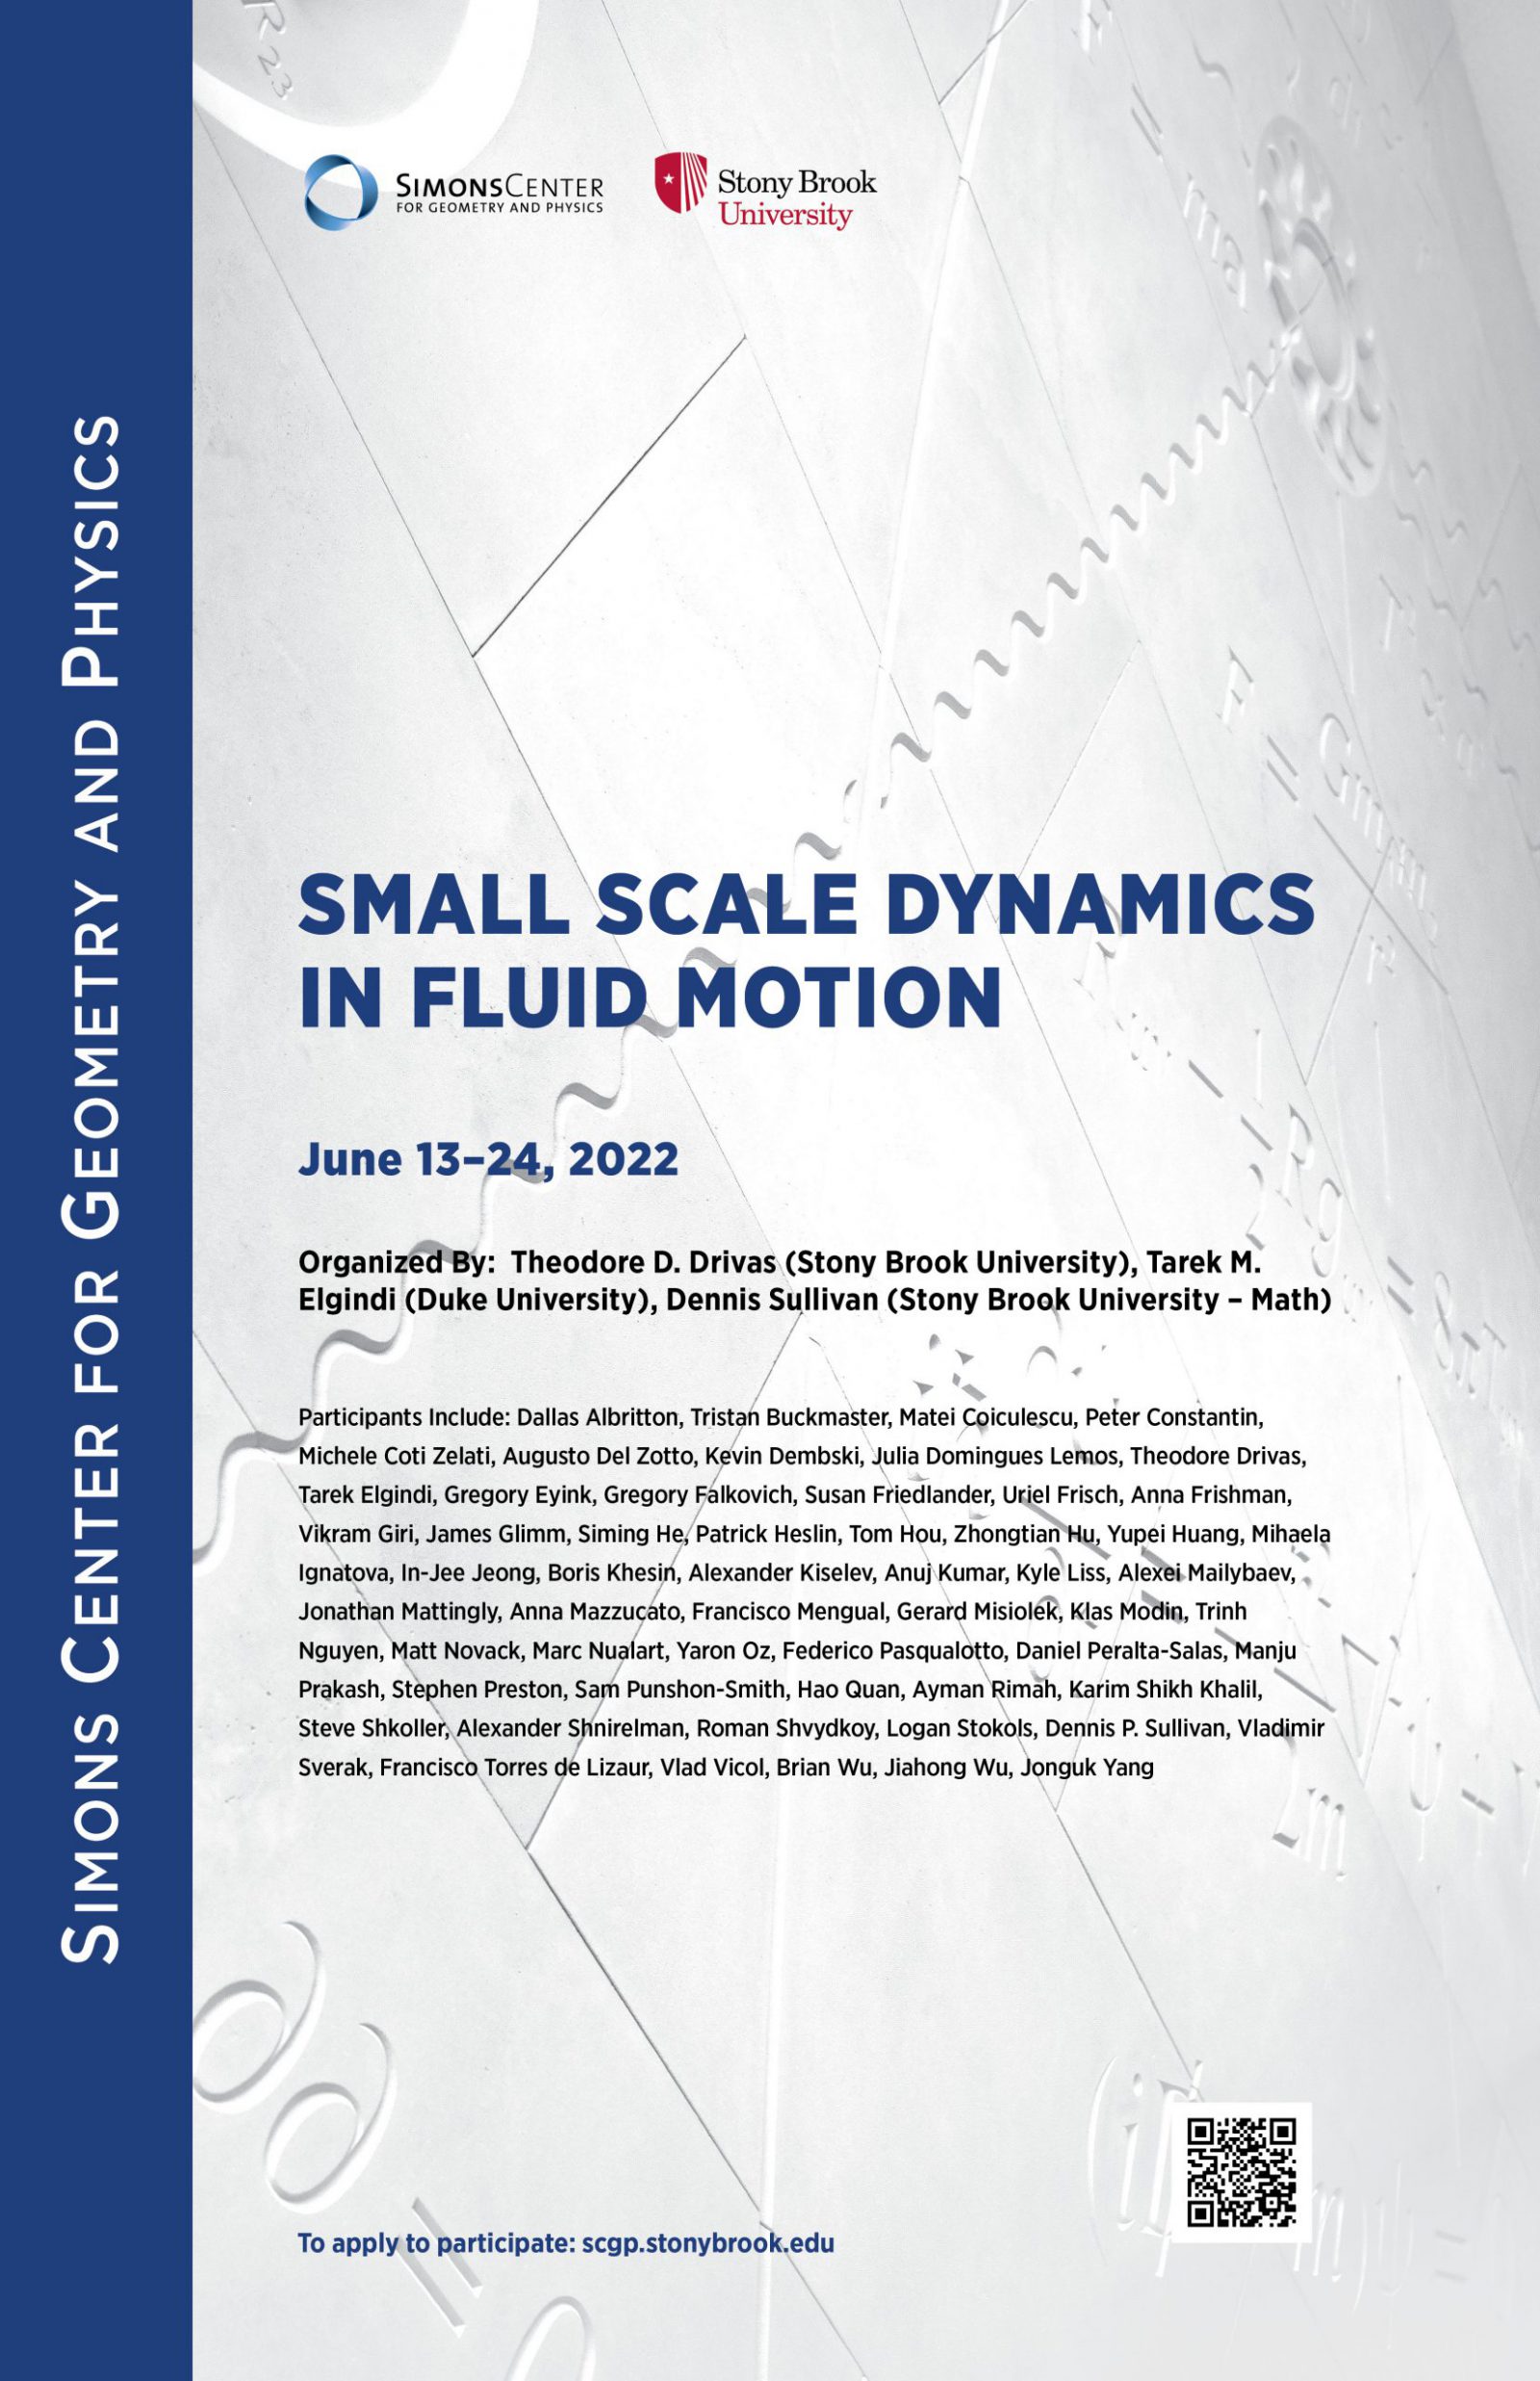 Small Scale Dynamics